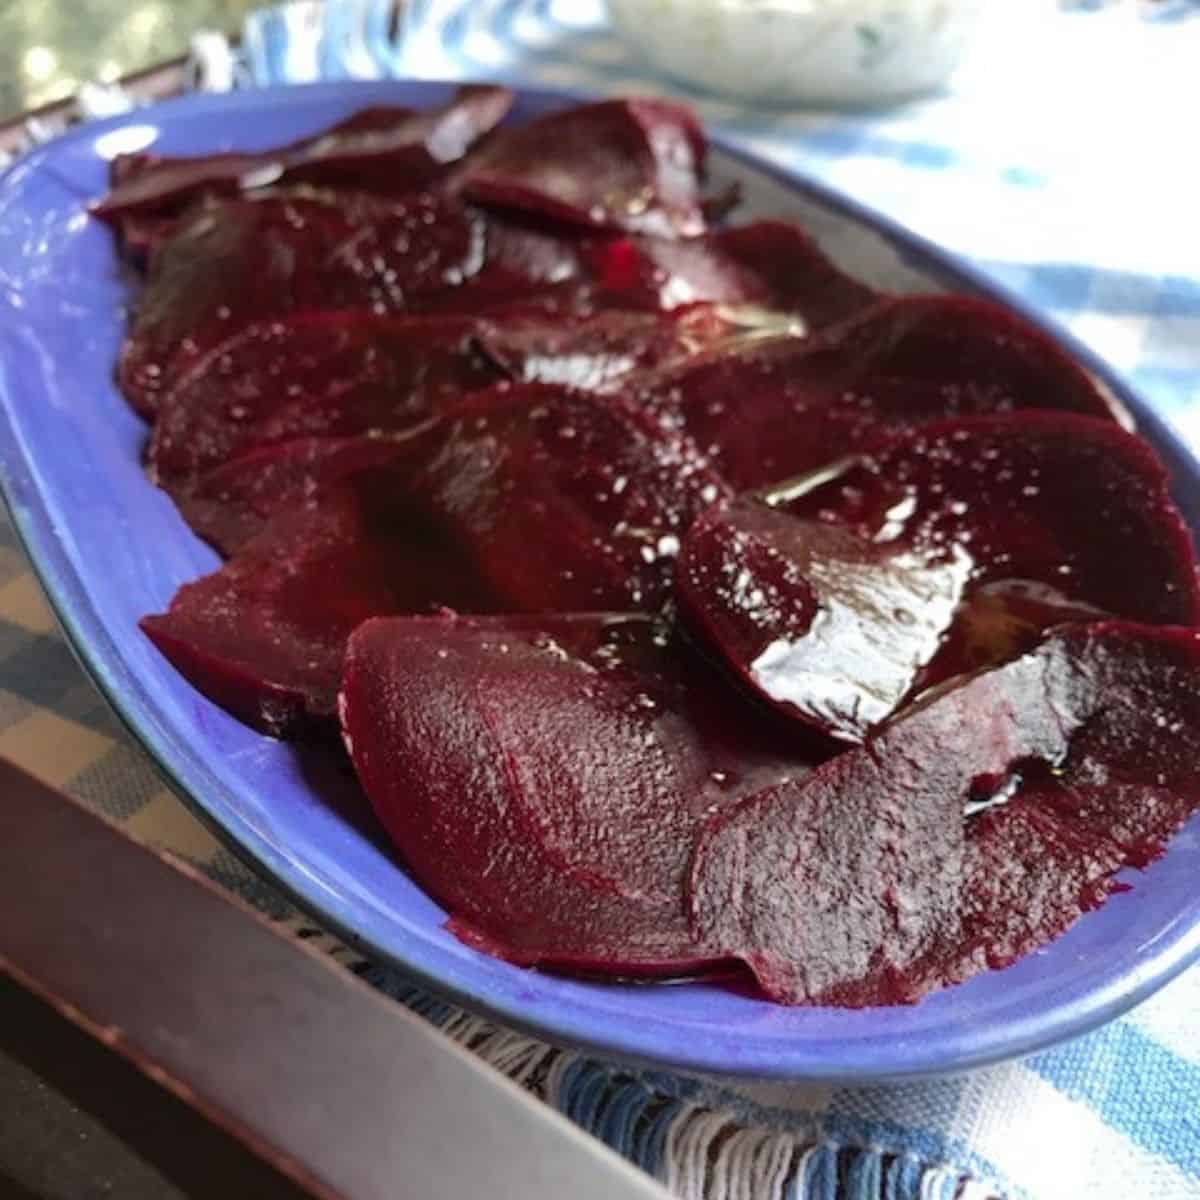 Sliced boiled beets on a blue dish.